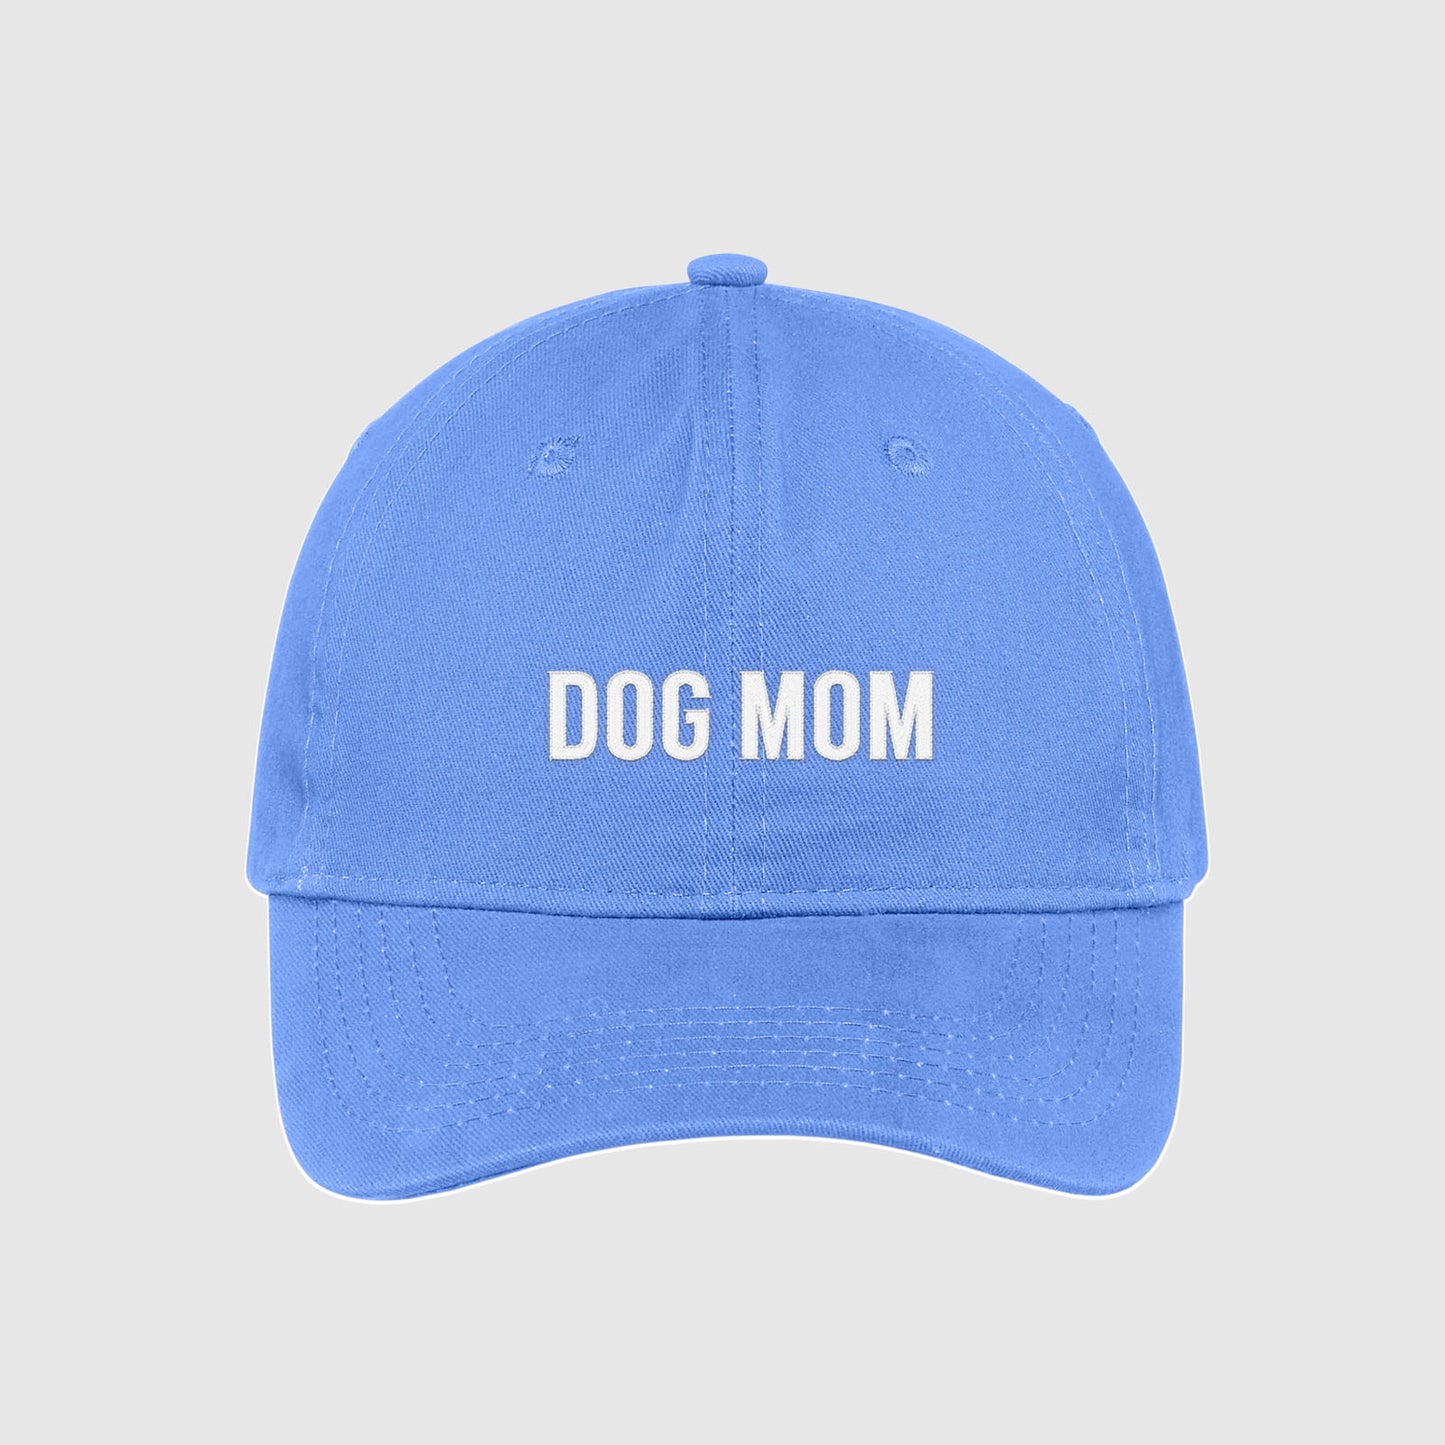 Carolina Blue Dog Mom Hat embroidered with white text.